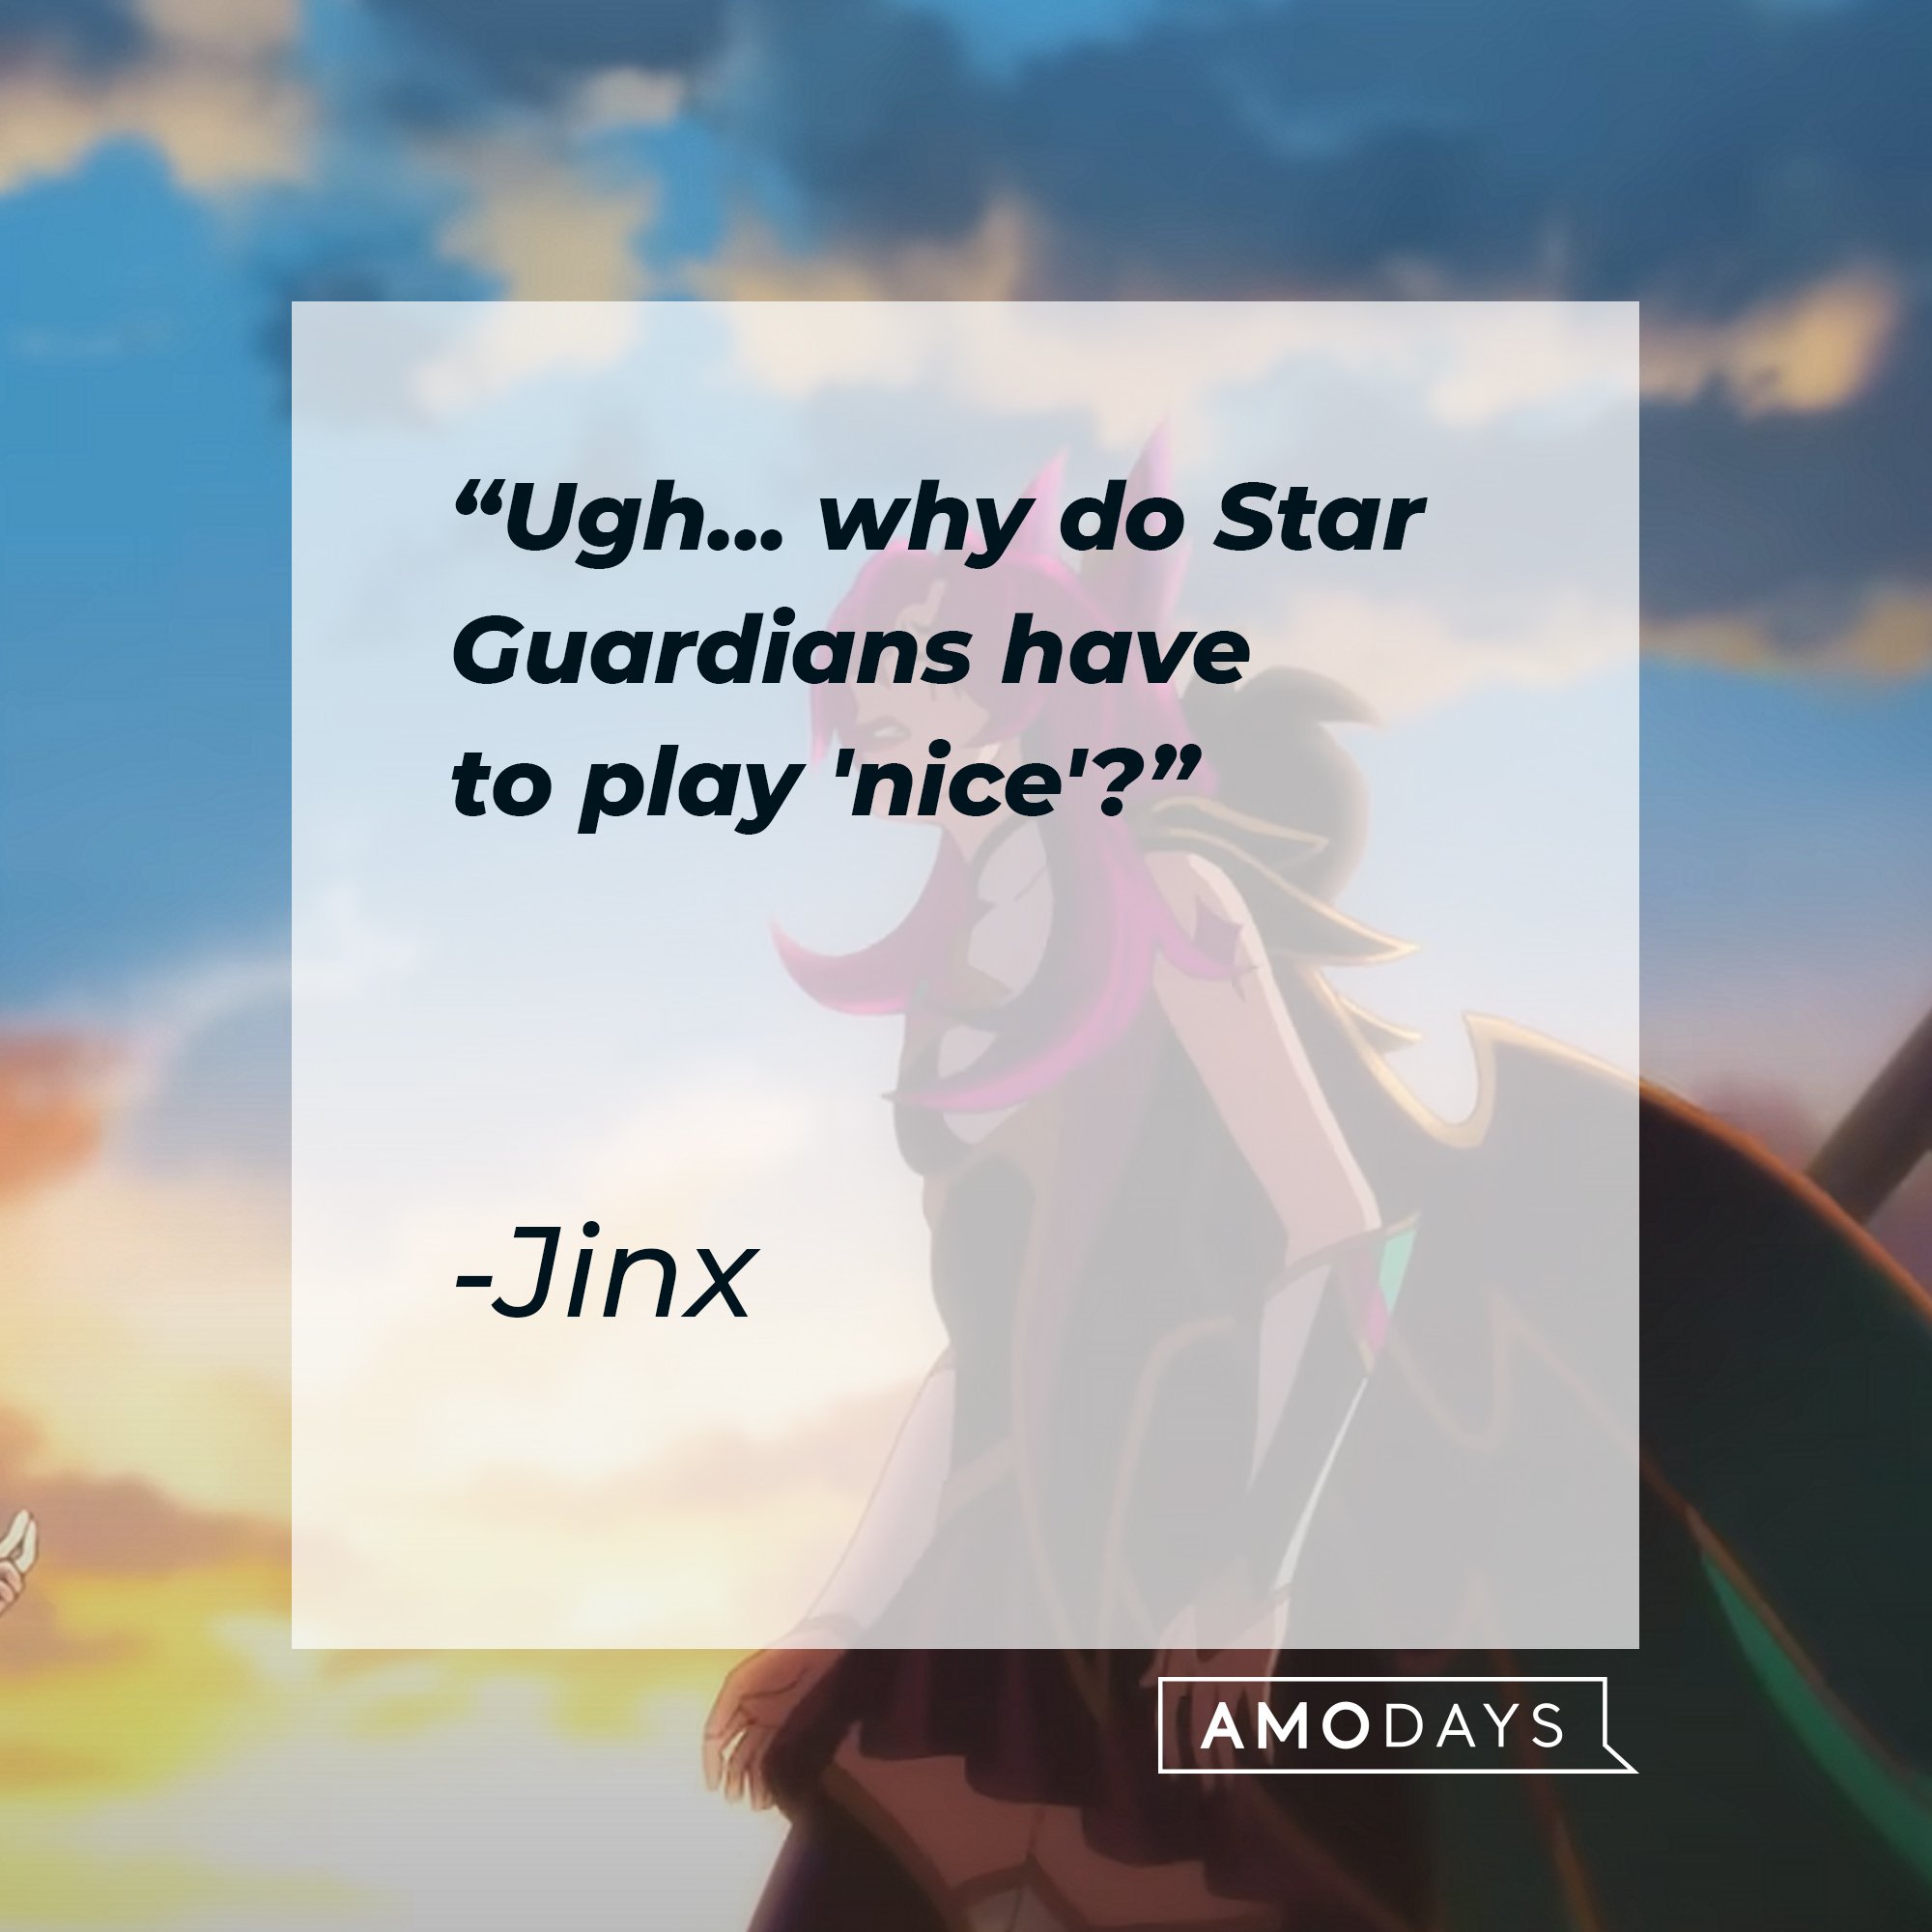 Jinx's quote: "Ugh... why do Star Guardians have to play 'nice'?" | Image: AmoDays